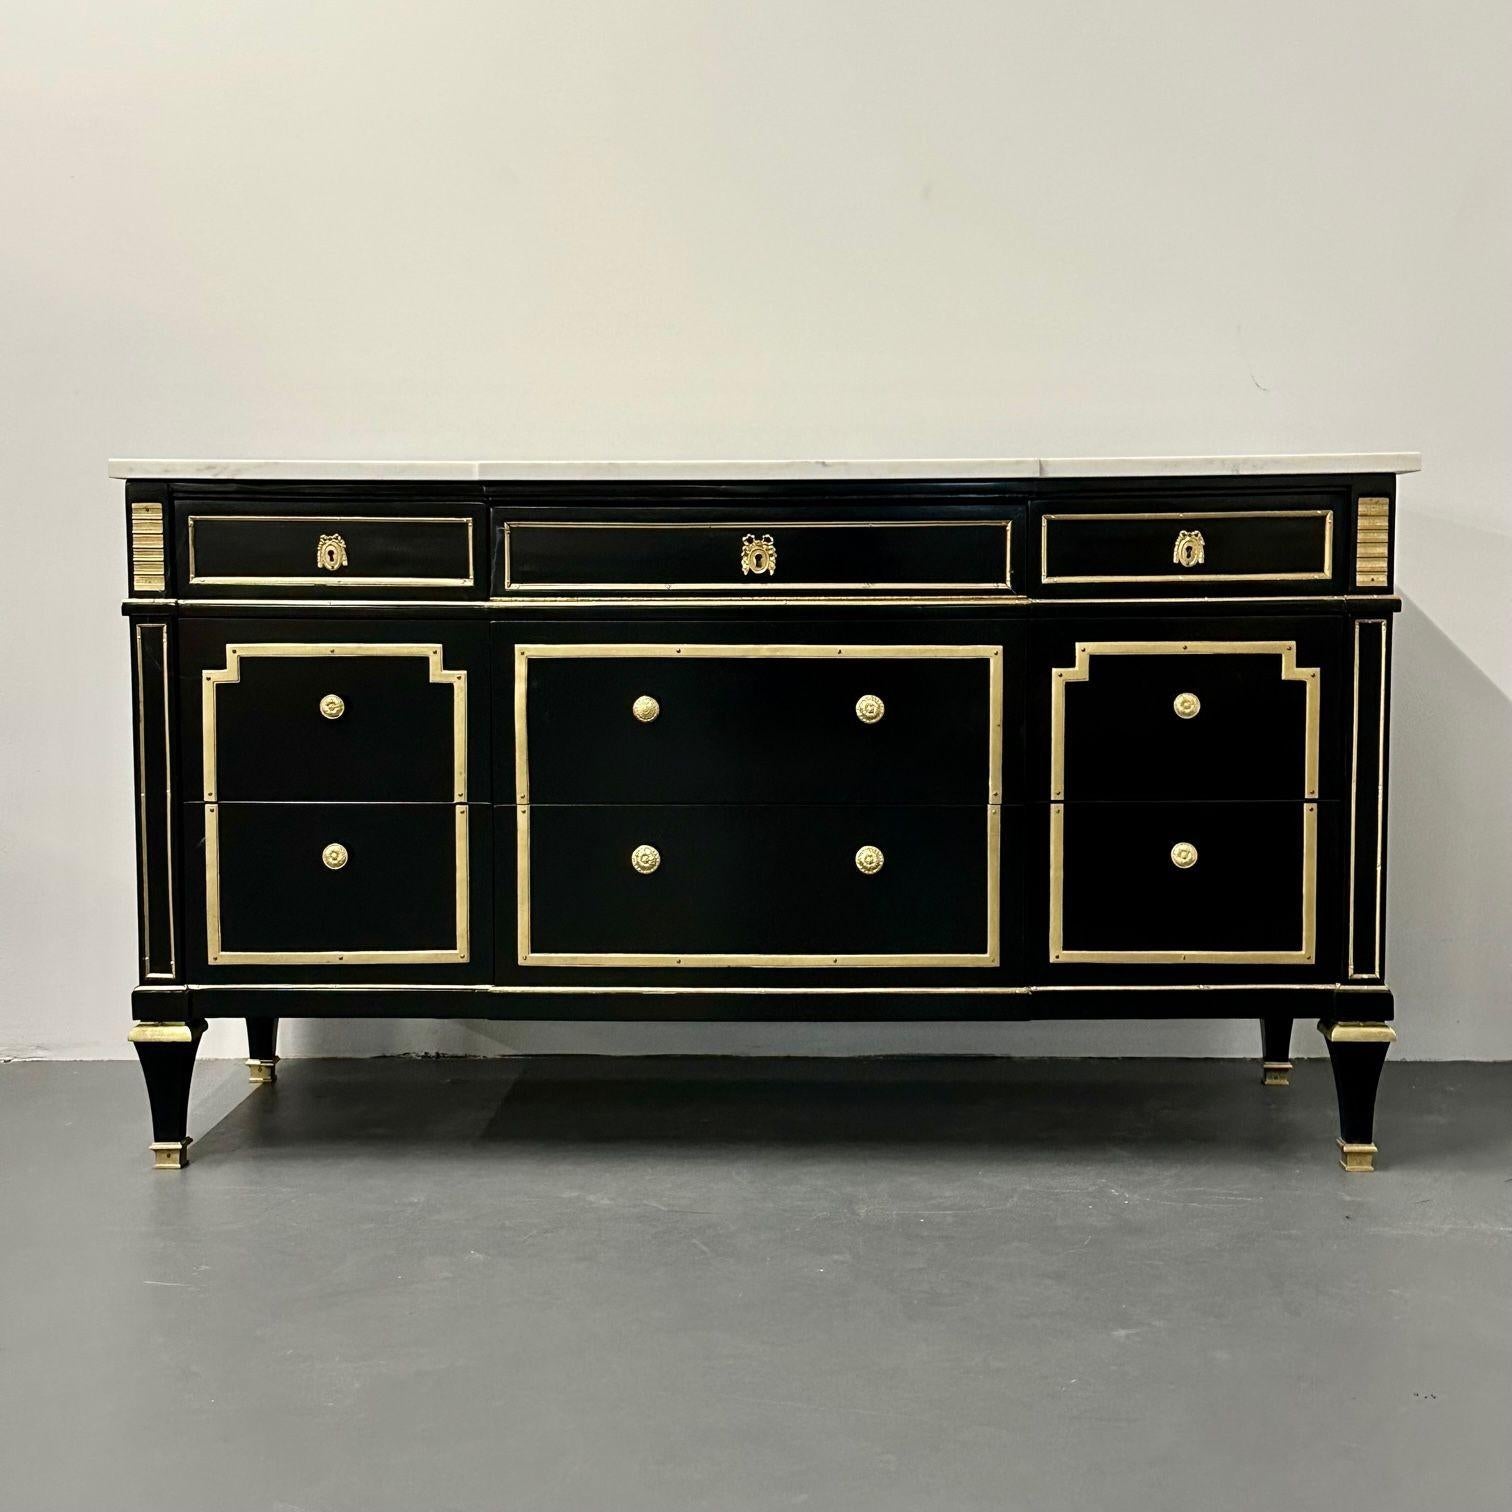 Hollywood Regency Jansen Style ebony commode / chest, marble top, bronze mounted, fully refinished. 
Nine drawer dresser having oak secondaries supporting a white and gray veined marble top. The case in a fine ebony finish with heavy wonderfully